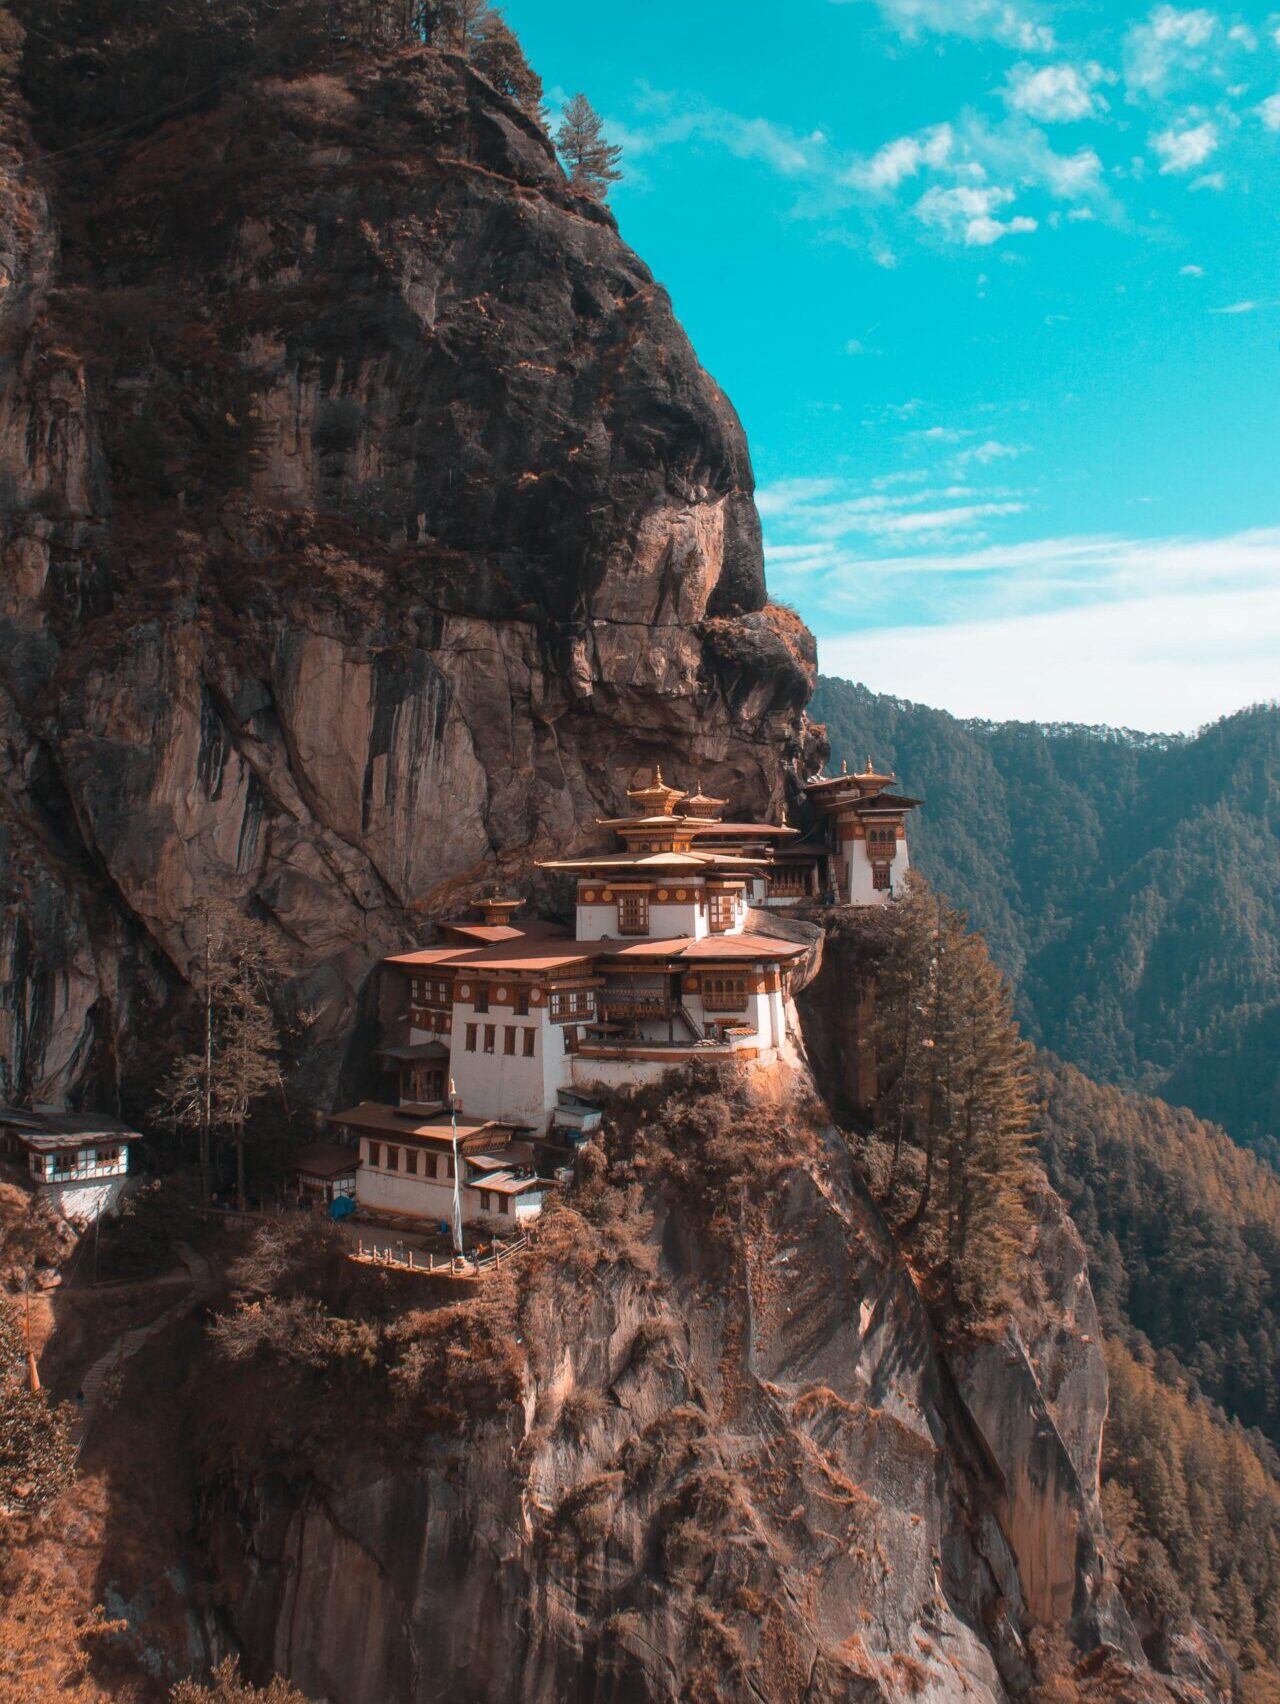 Bhutan reopens its borders | Paro Taktsang in Bhutan, etched on a cliffside beneath a bright blue sky